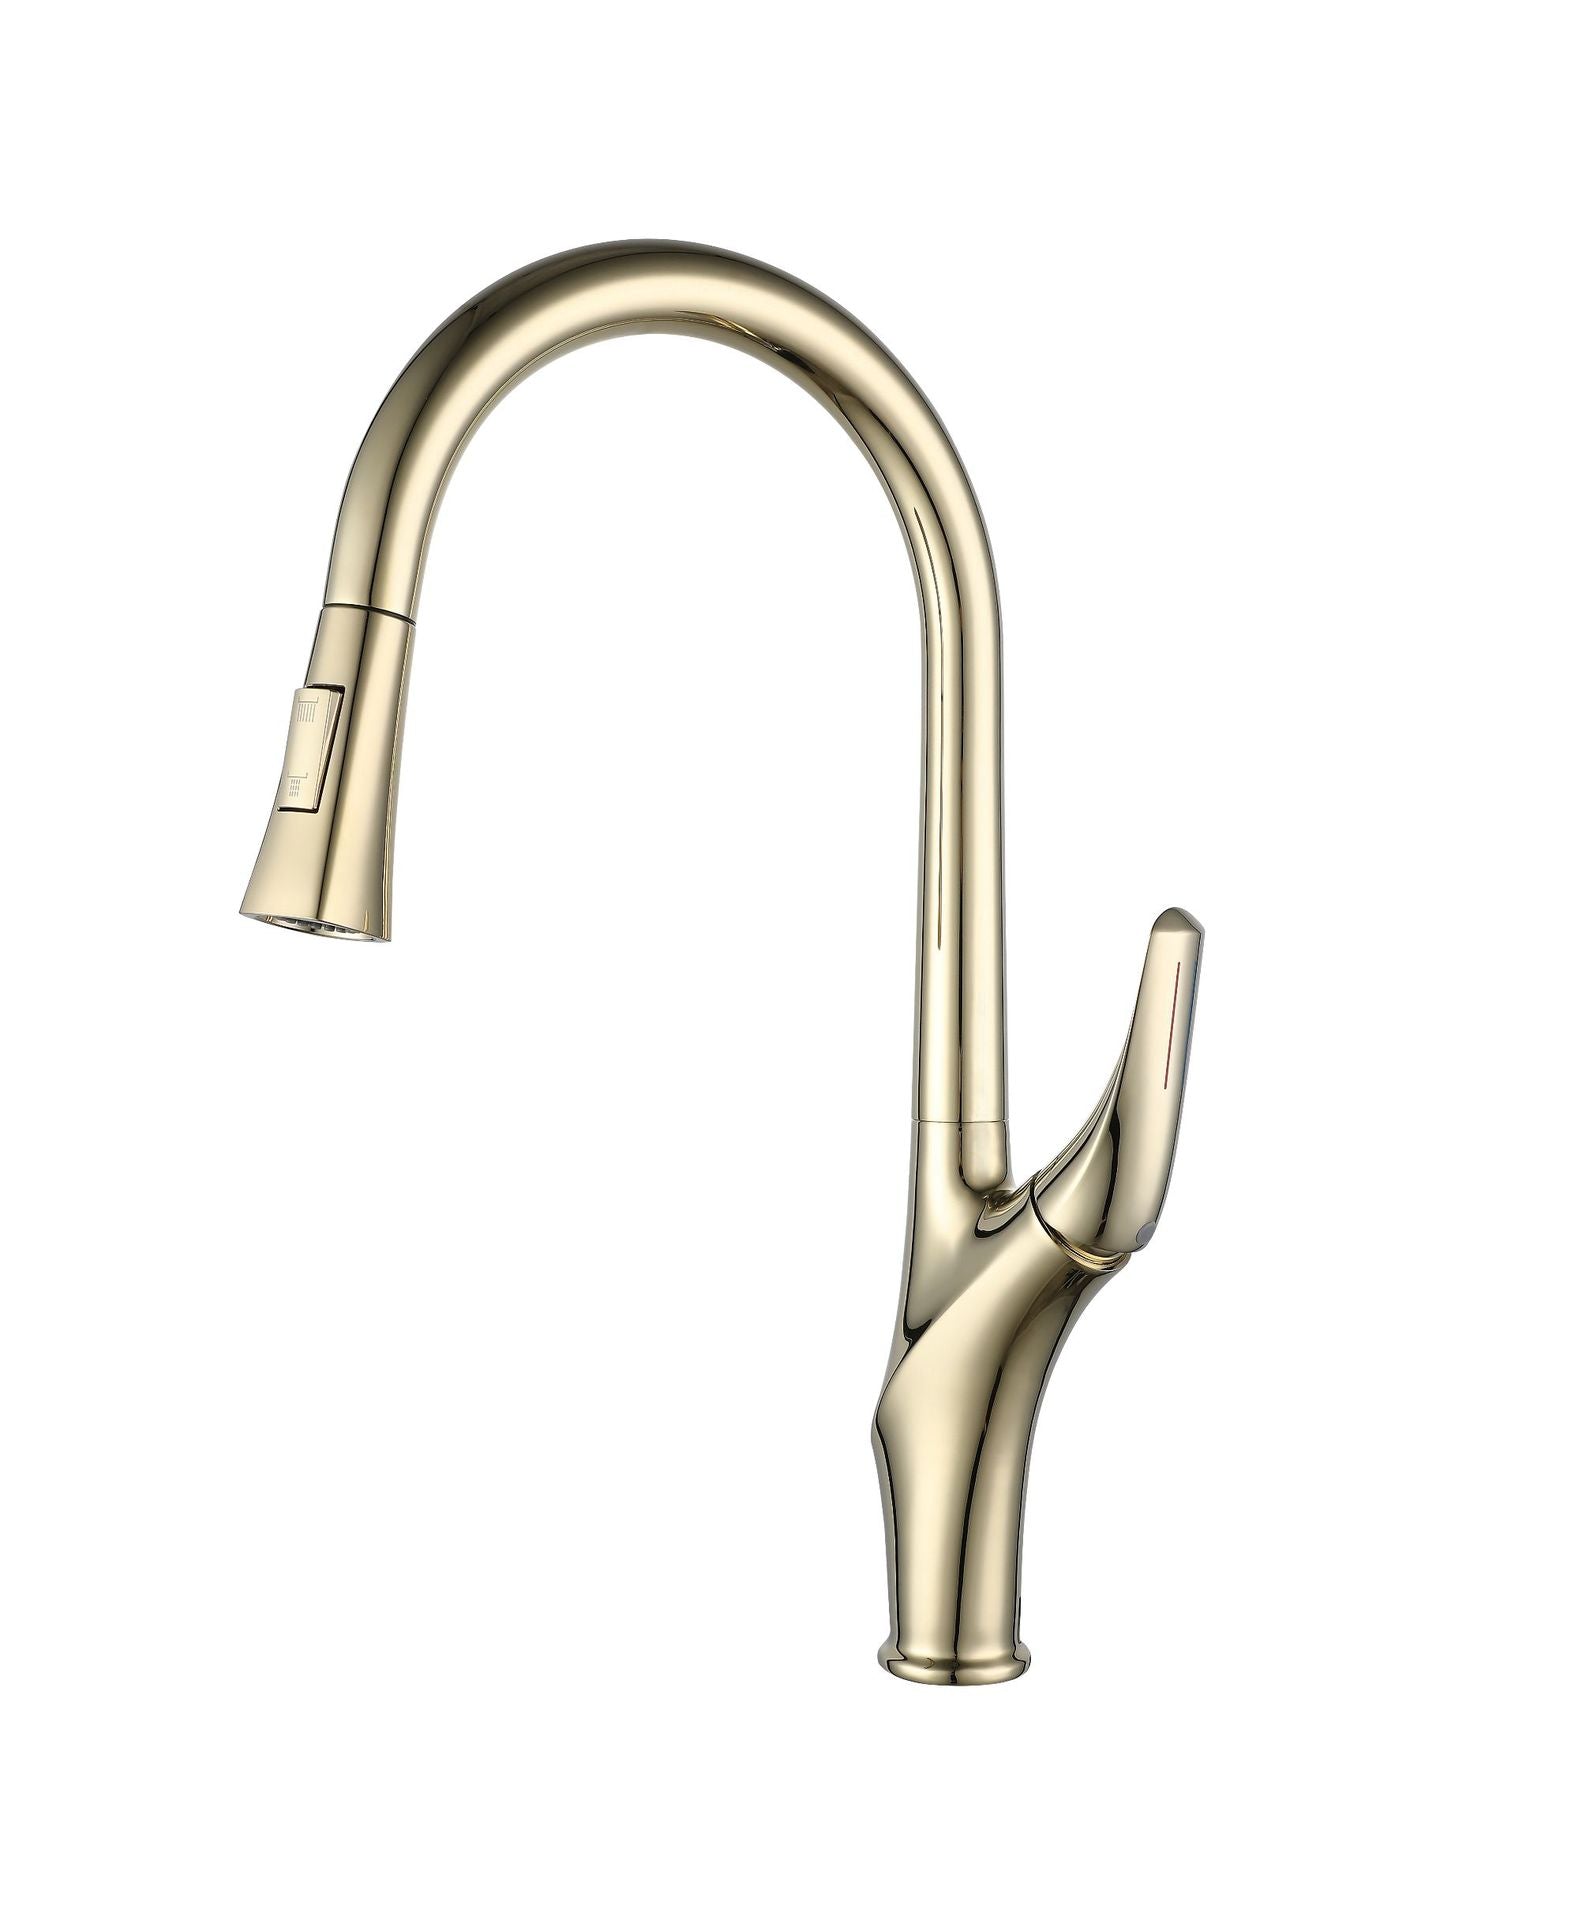 Eumtenr Solid Brass Hot and Cold Water Pull Down Sprayer Kitchen Faucet